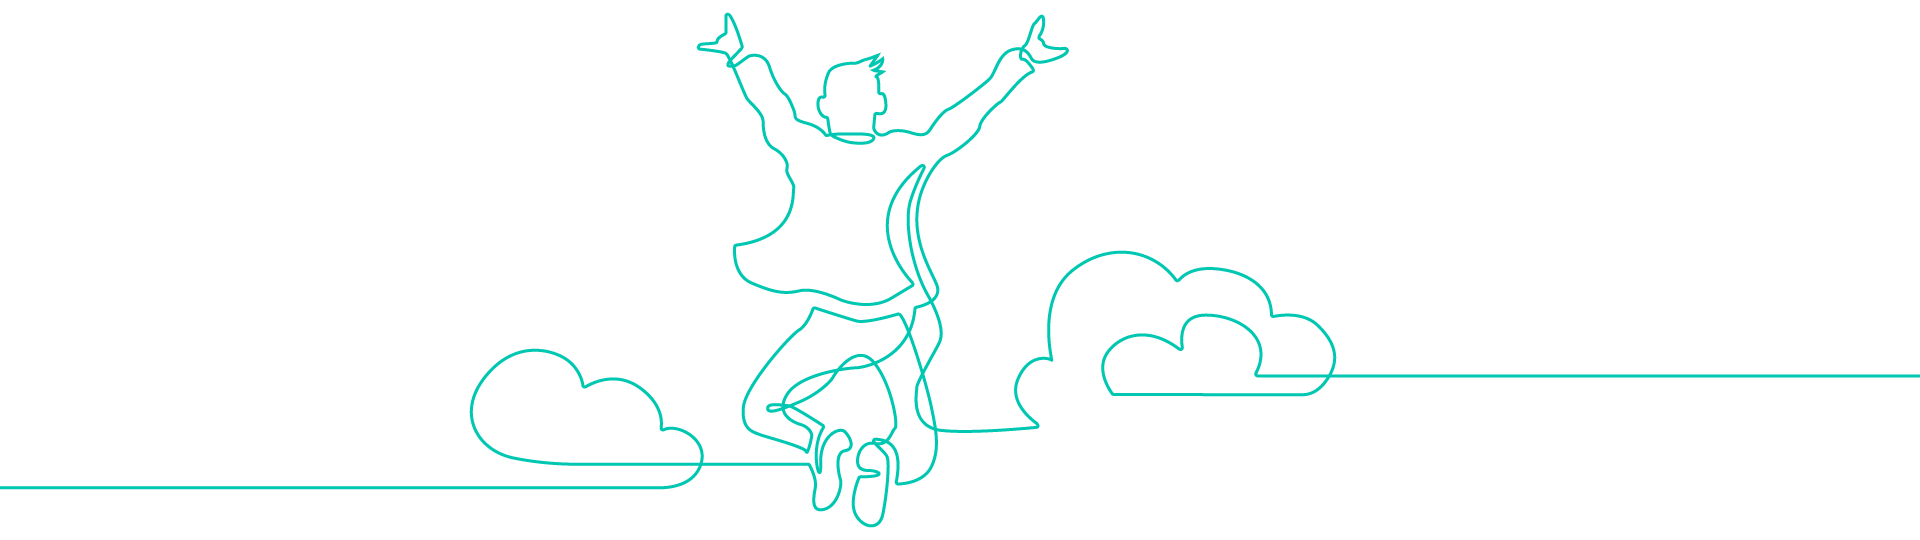 Line illustration of a person jumping in the air from the back in between two clouds